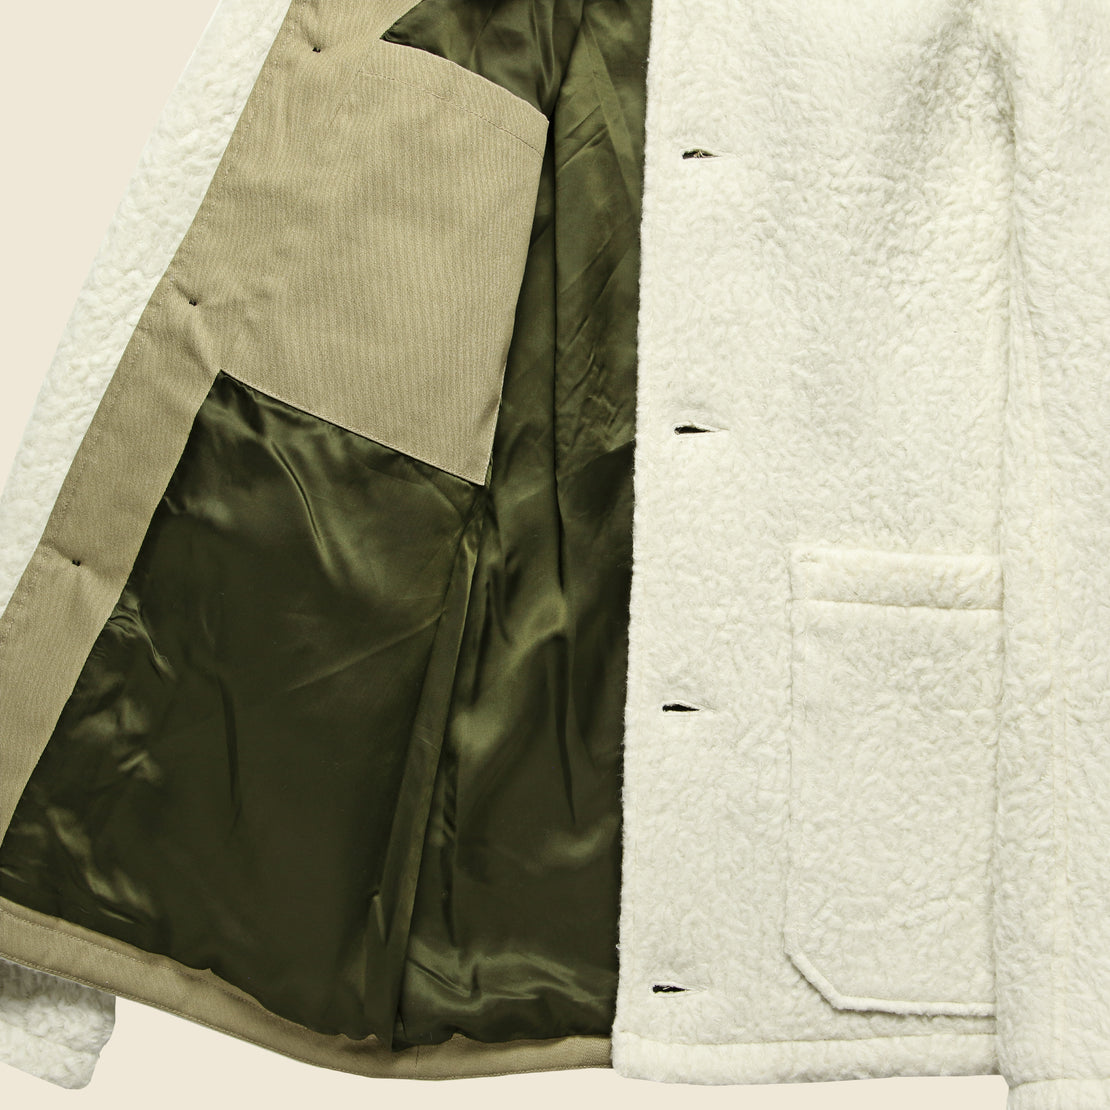 Sherpa Chore Jacket - White - Todd Snyder - STAG Provisions - Outerwear - Coat / Jacket